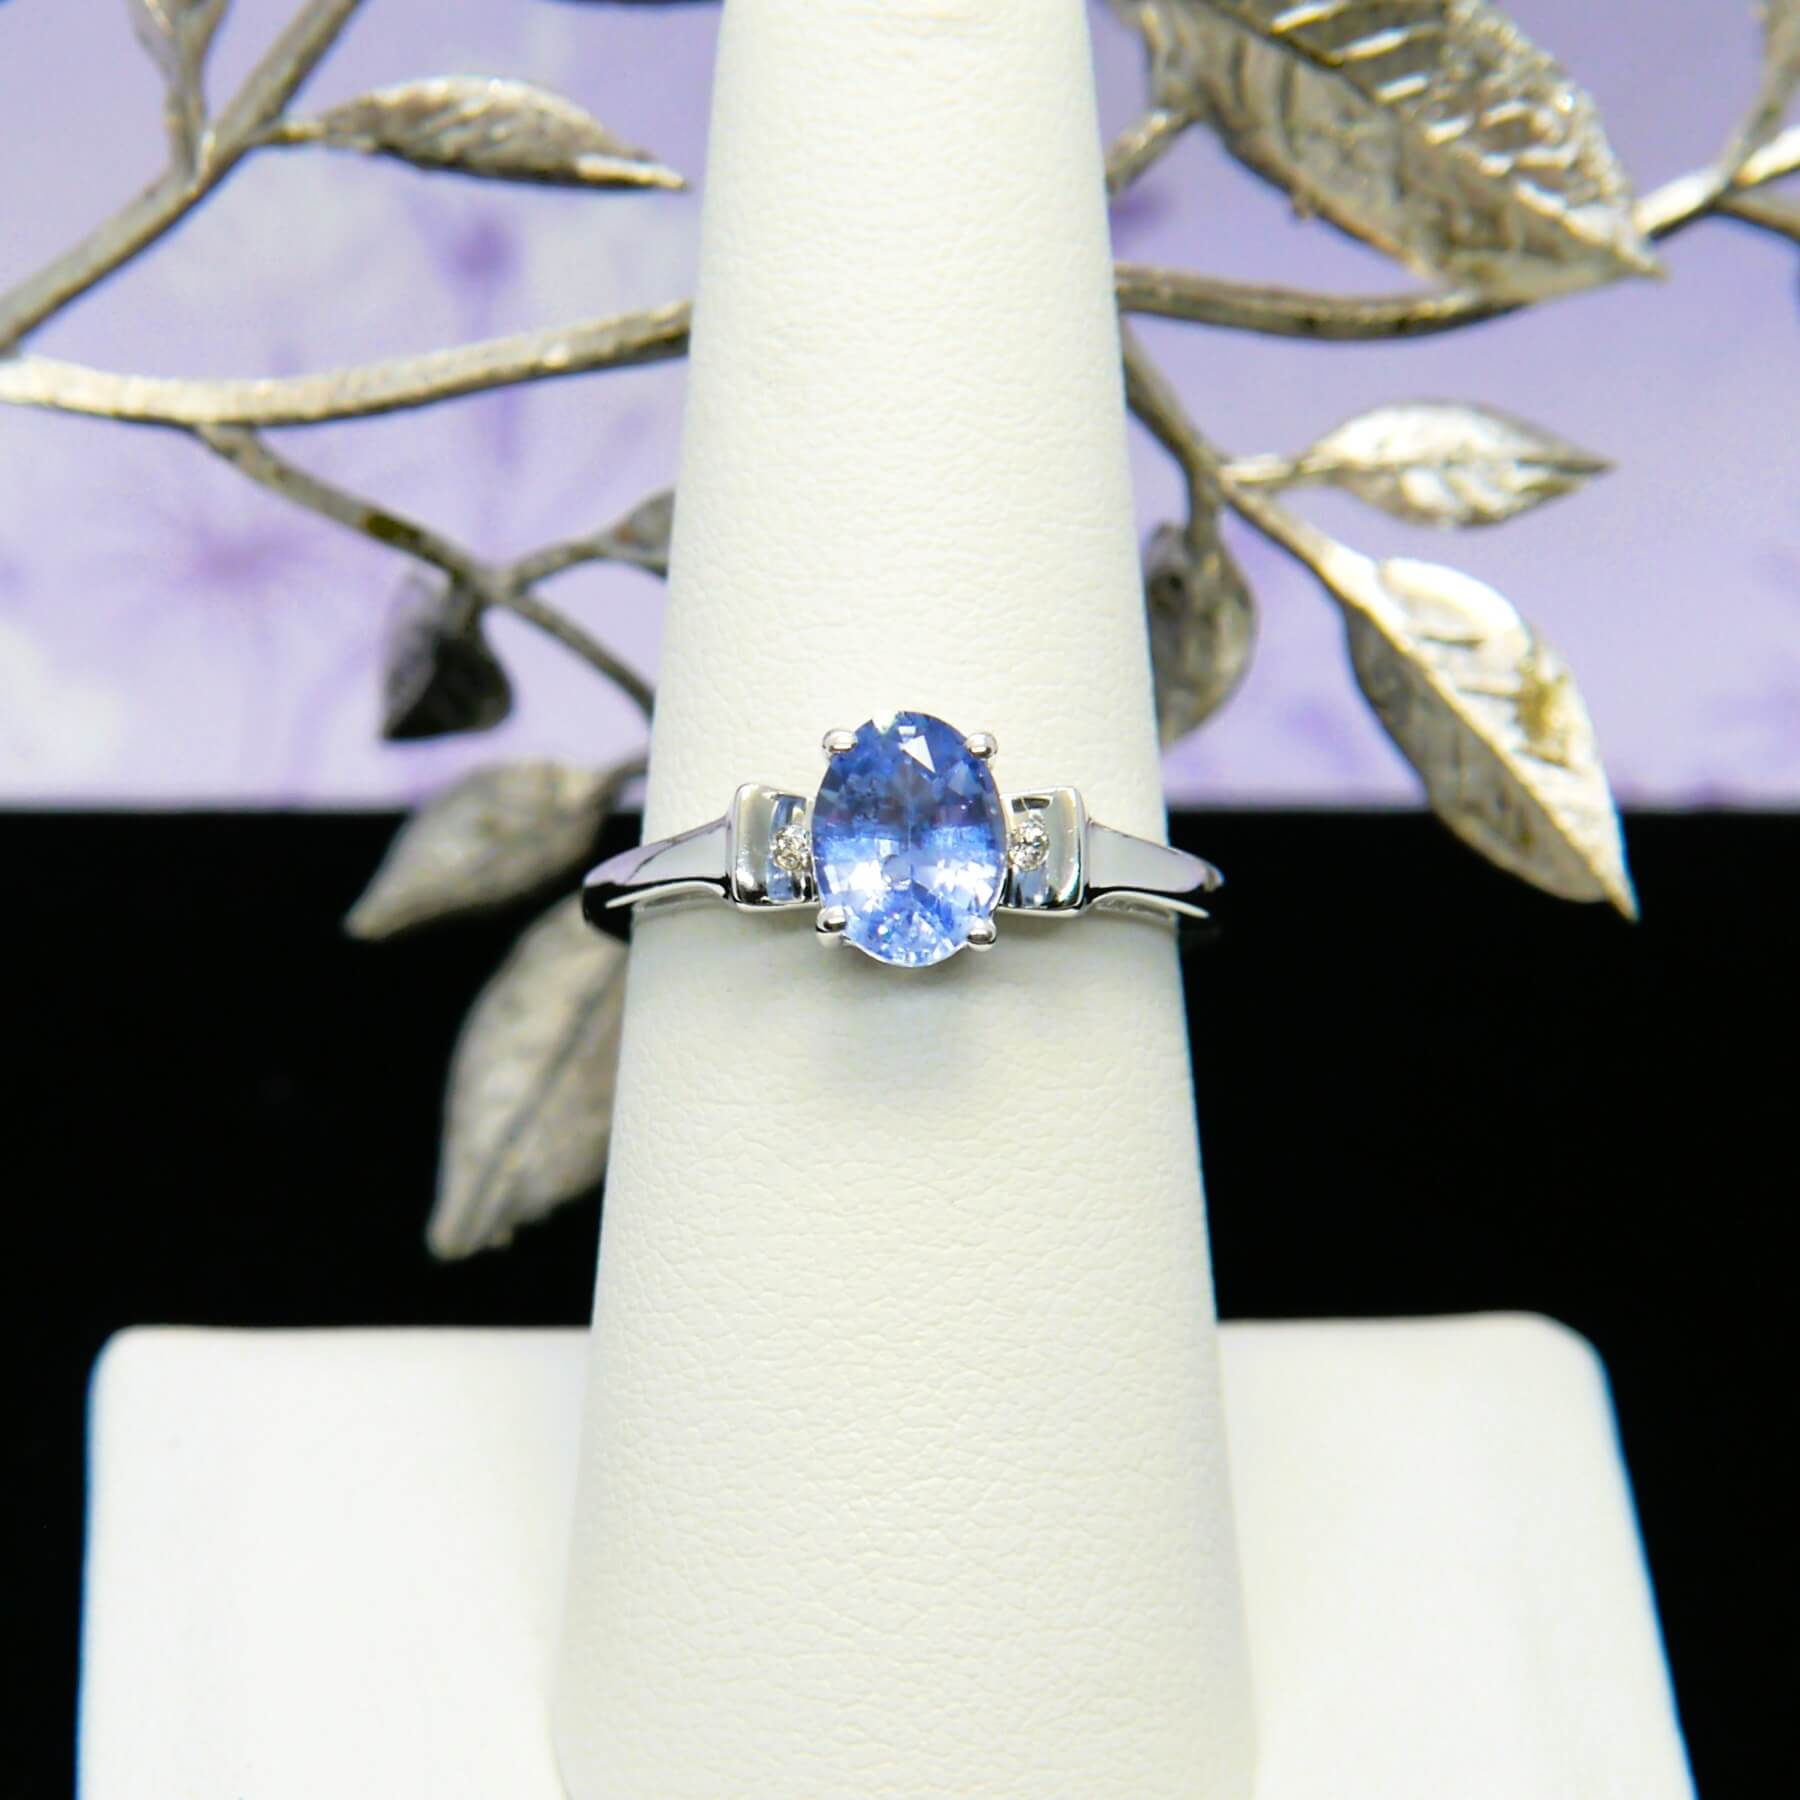 Oval Ceylon Sapphire and Diamond Ring in 14k White Gold